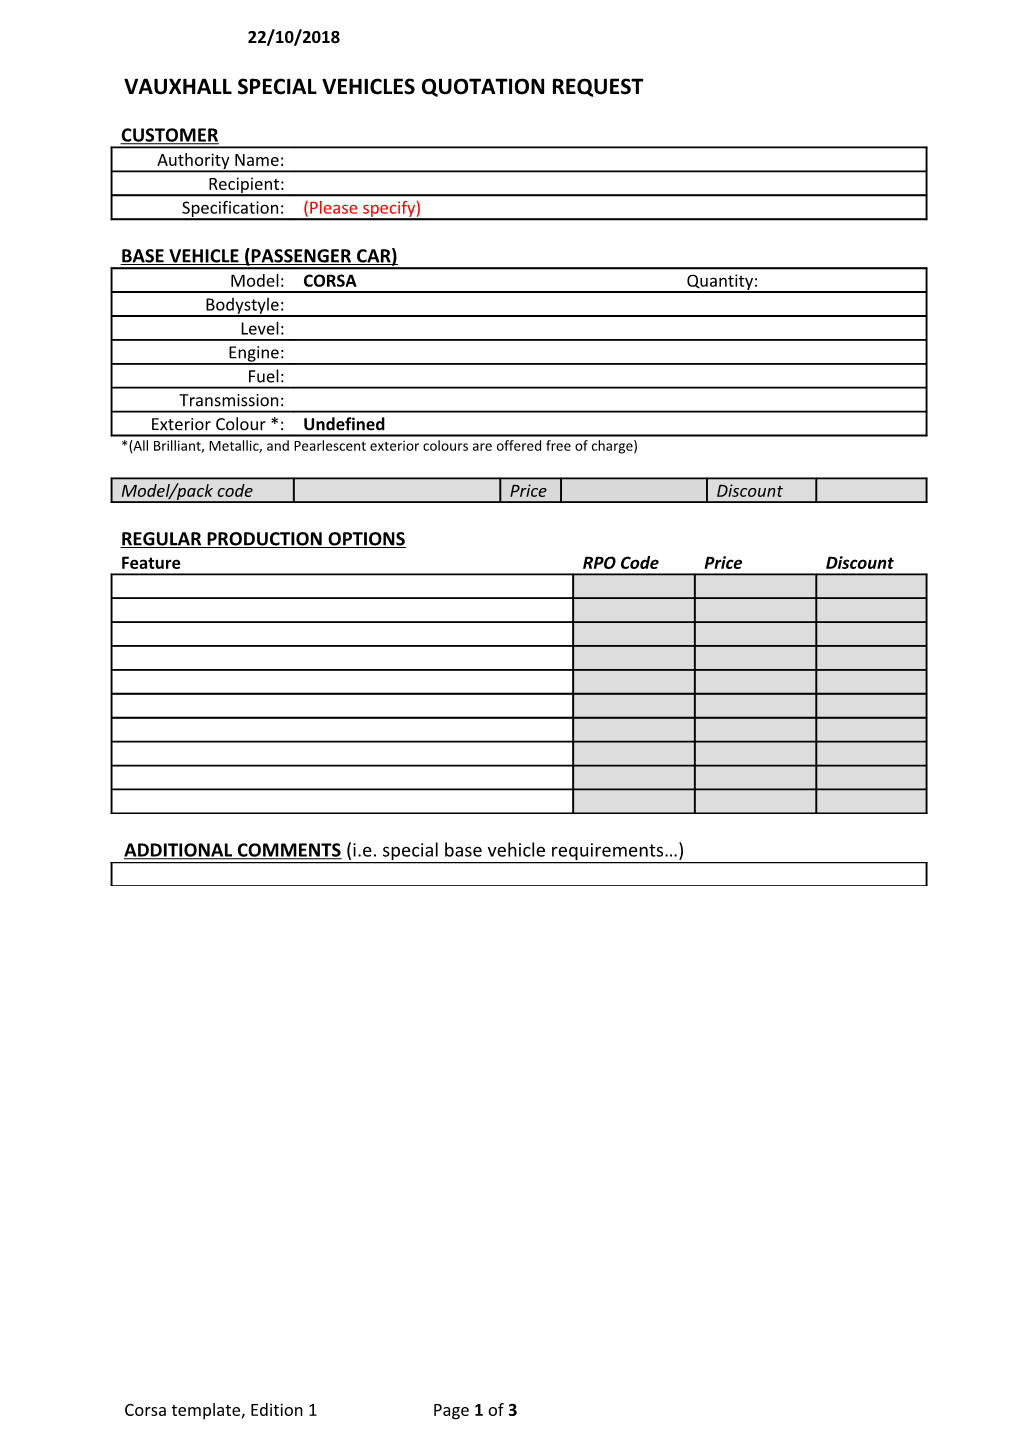 Vauxhall Special Vehicles Quotation Request